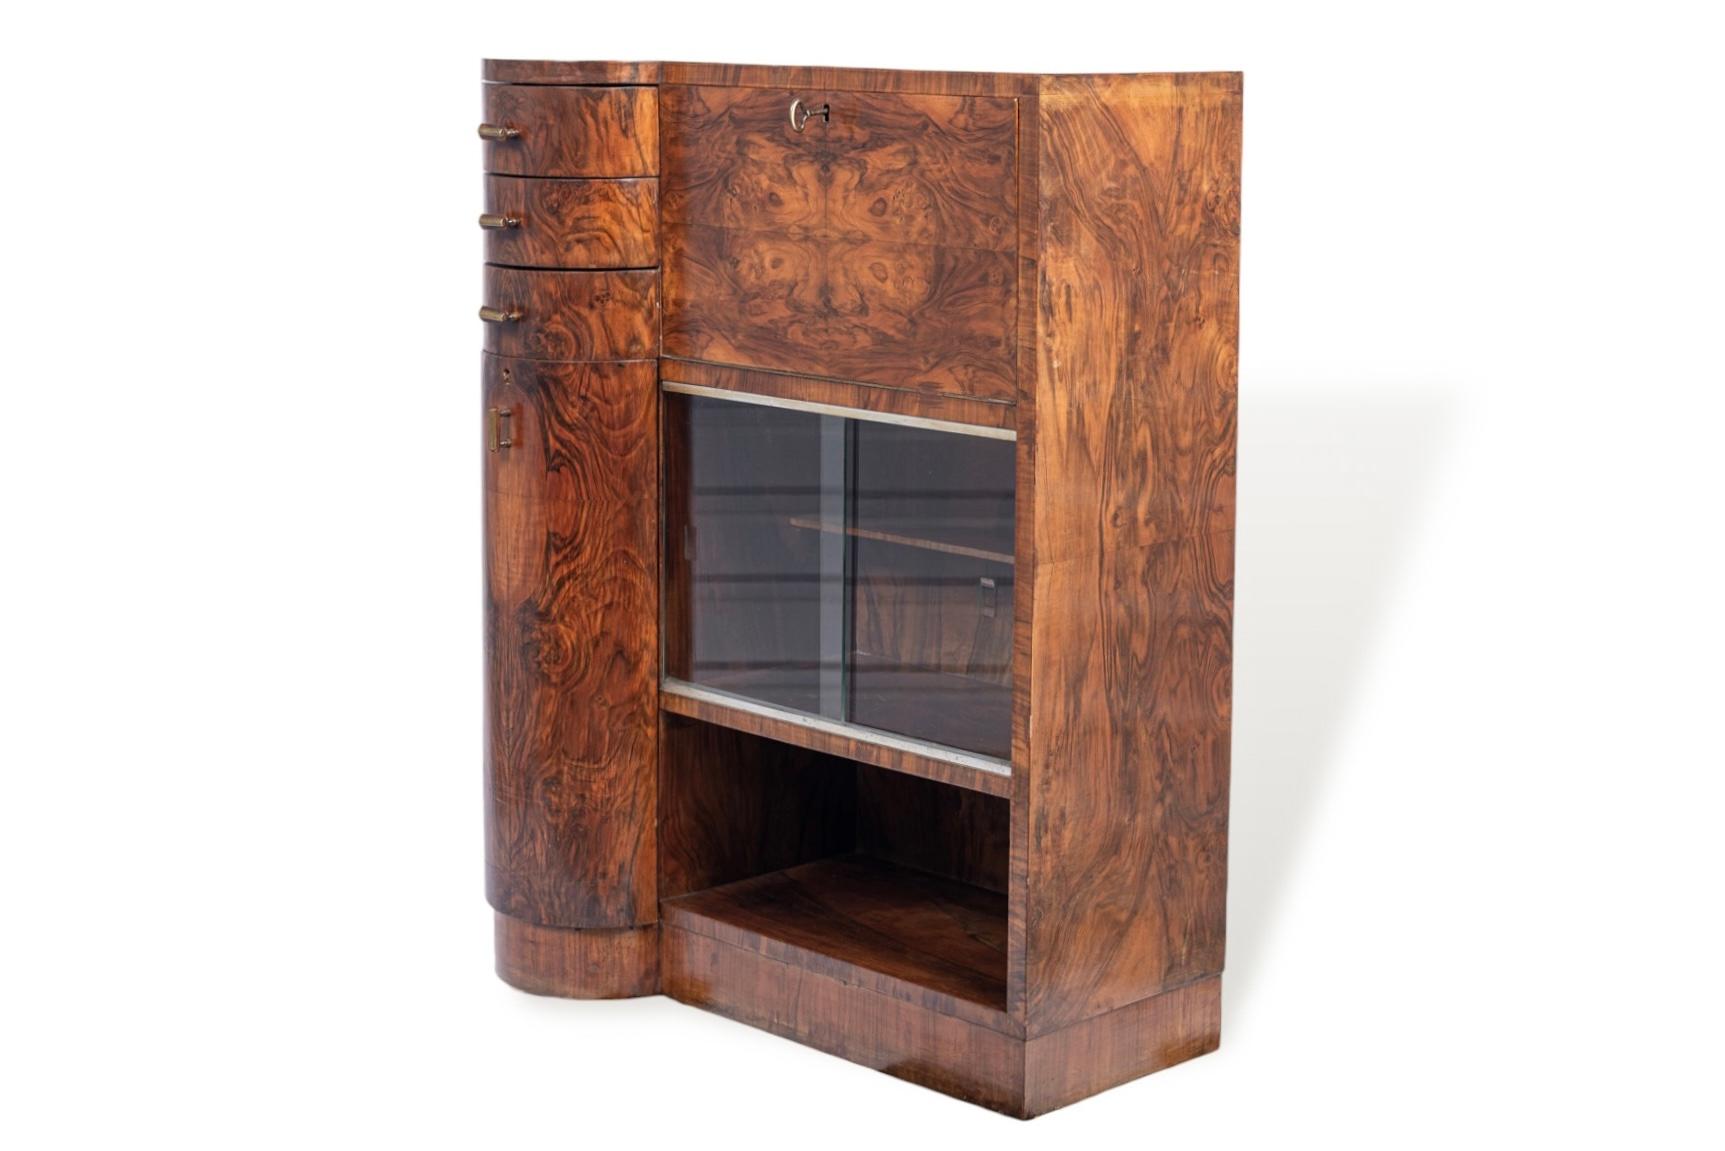 This unique antique Art Deco burl wood and glass secretary desk cabinet is circa 1930. This small cabinet has a distinctive asymmetrical-shaped case and is expertly handcrafted with gorgeous match-booked walnut burl wood grain and finished